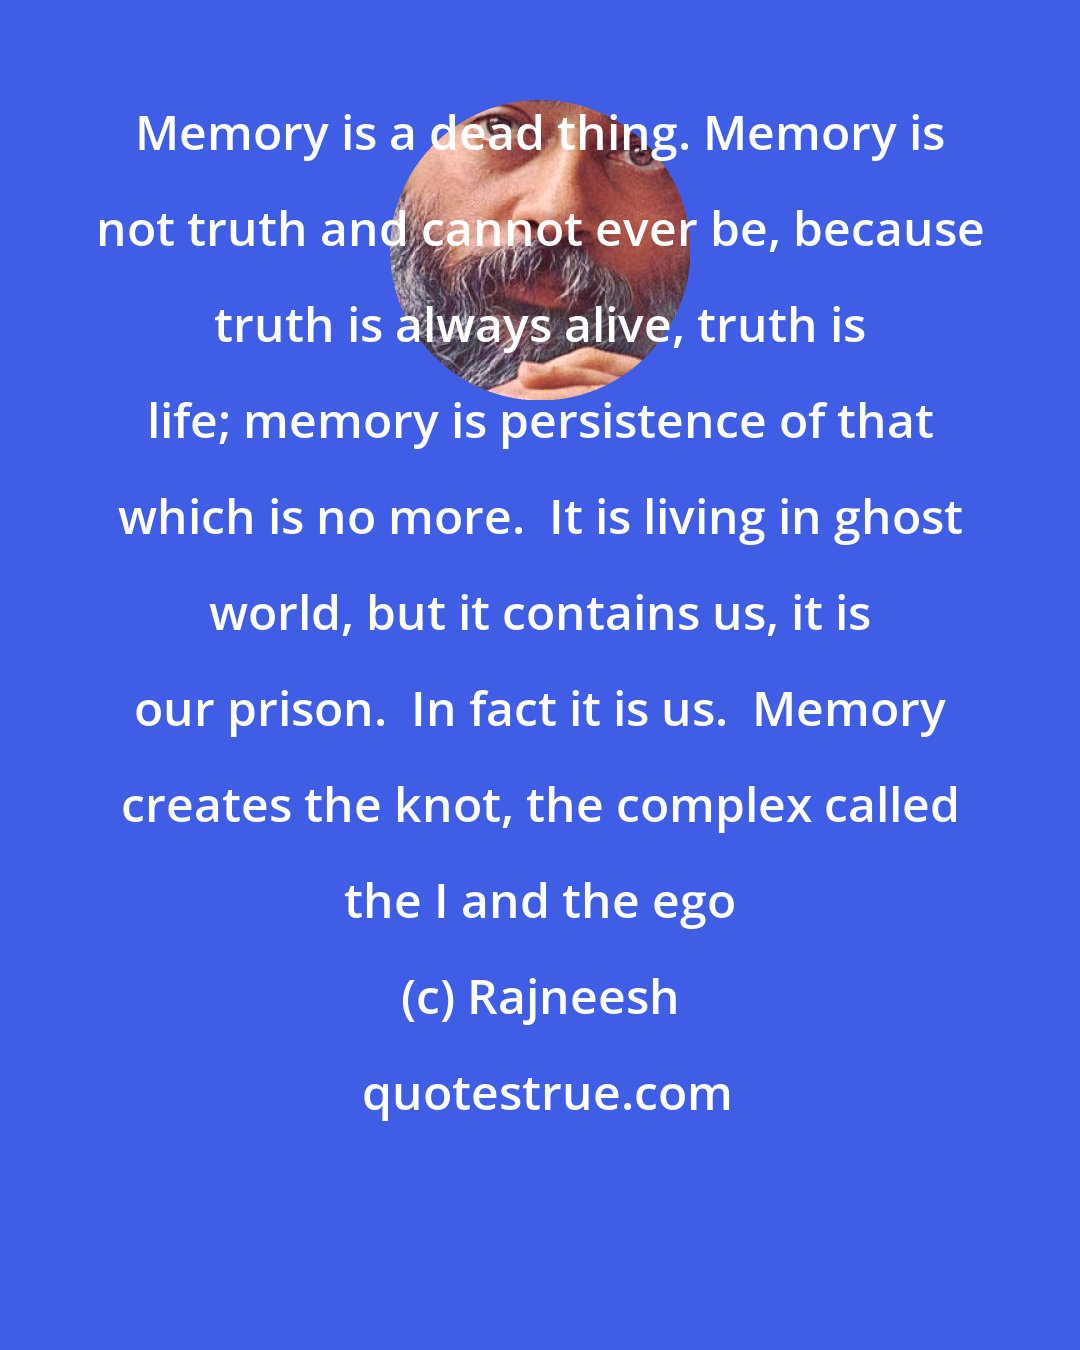 Rajneesh: Memory is a dead thing. Memory is not truth and cannot ever be, because truth is always alive, truth is life; memory is persistence of that which is no more.  It is living in ghost world, but it contains us, it is our prison.  In fact it is us.  Memory creates the knot, the complex called the I and the ego